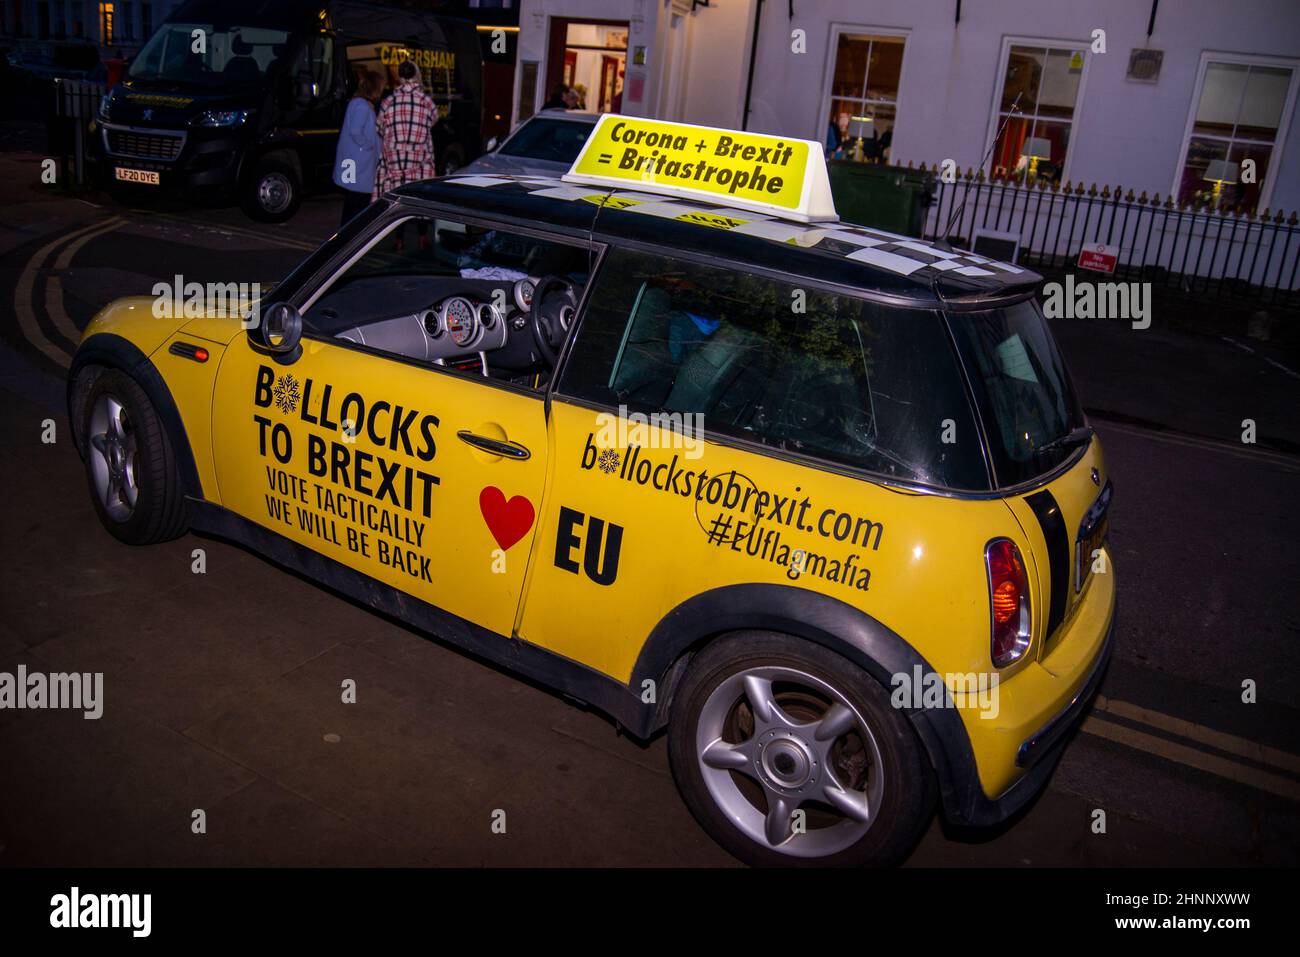 Anti Brexit, Pro EU protest car outside a venue hosting Nigel Farage and GB News in Southend on Sea, Essex, UK Stock Photo